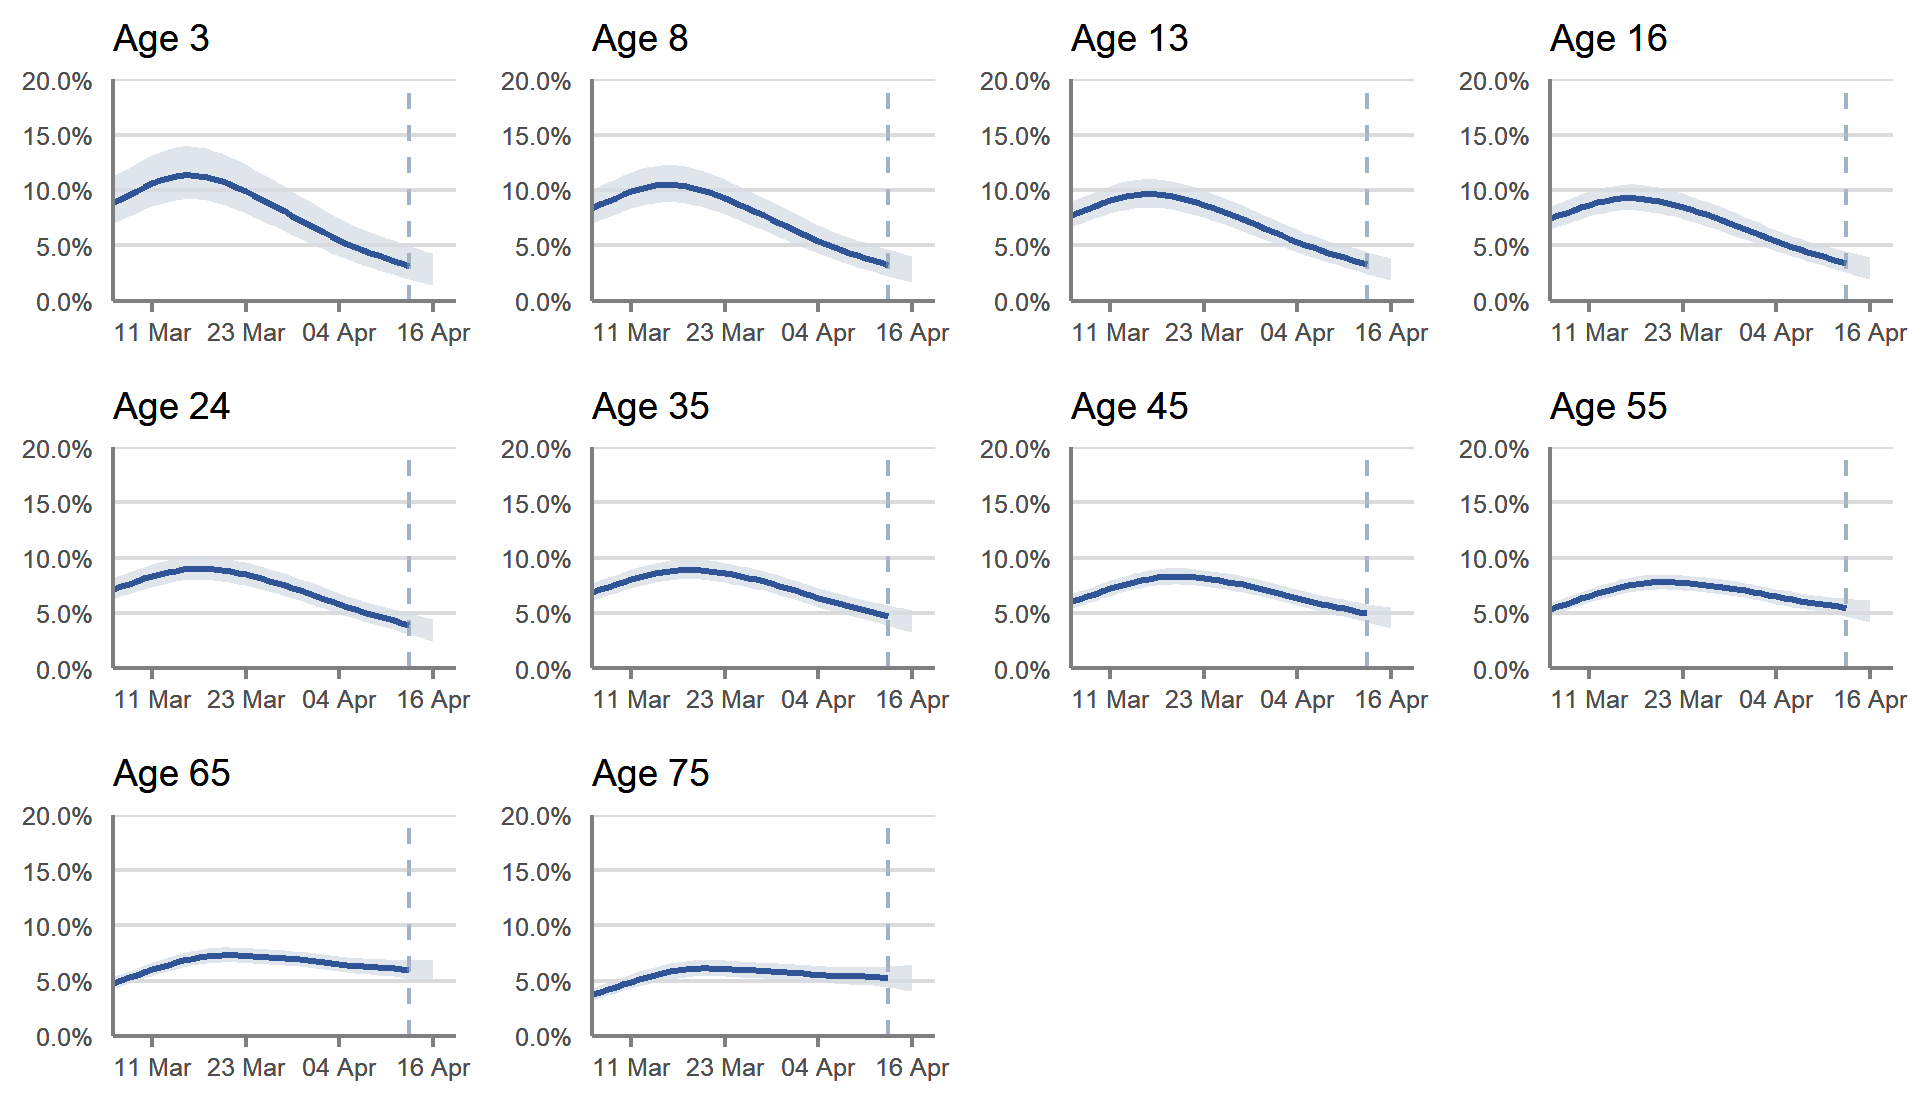 In Scotland, the estimated percentage of people testing positive has generally decreased in children and adults. However, the trend was uncertain for those aged 70 years and older.